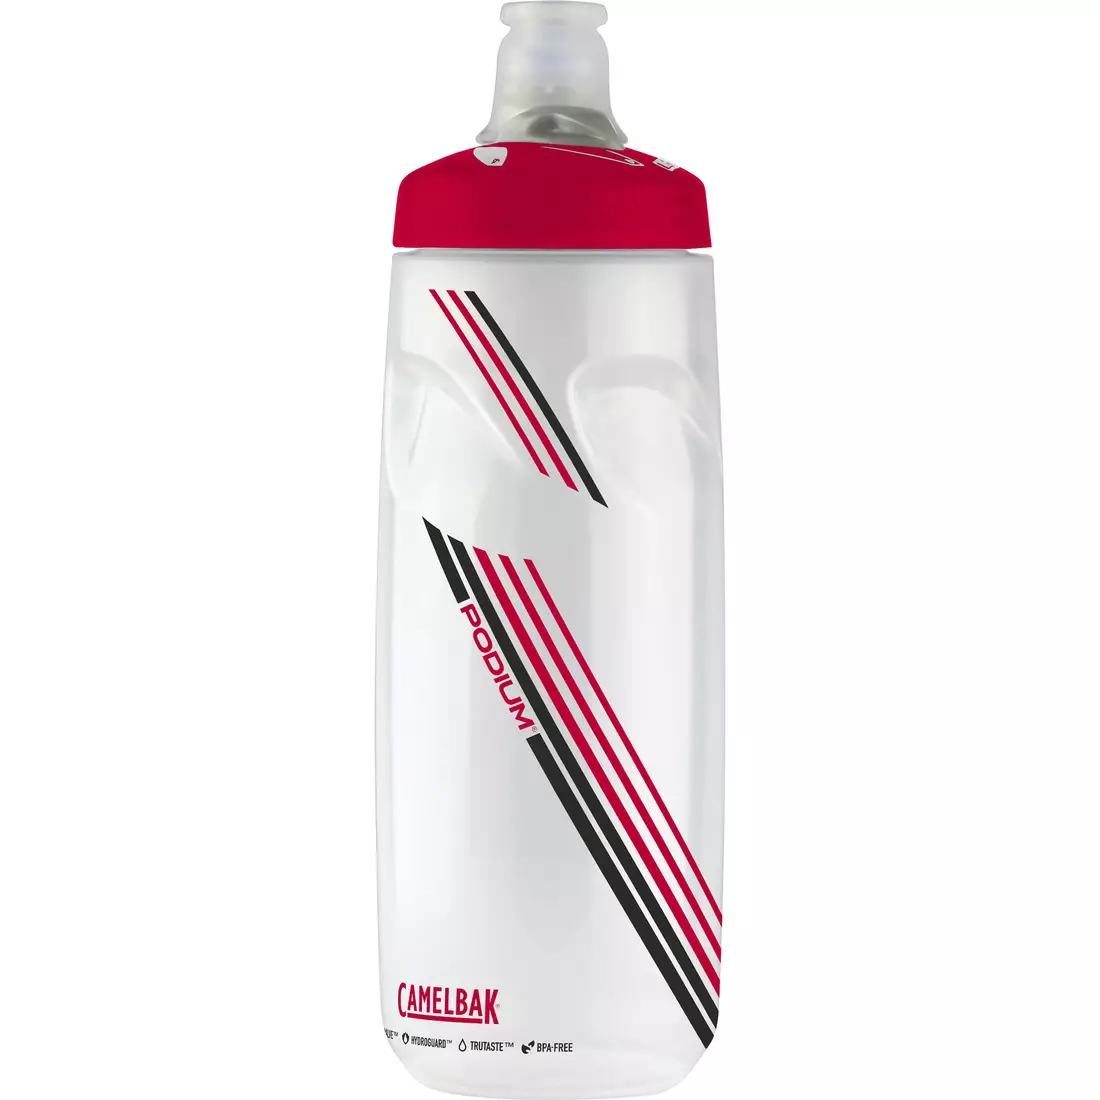 Camelbak SS18 Podium bicycle water bottle 24oz/ 710 ml Clear Red